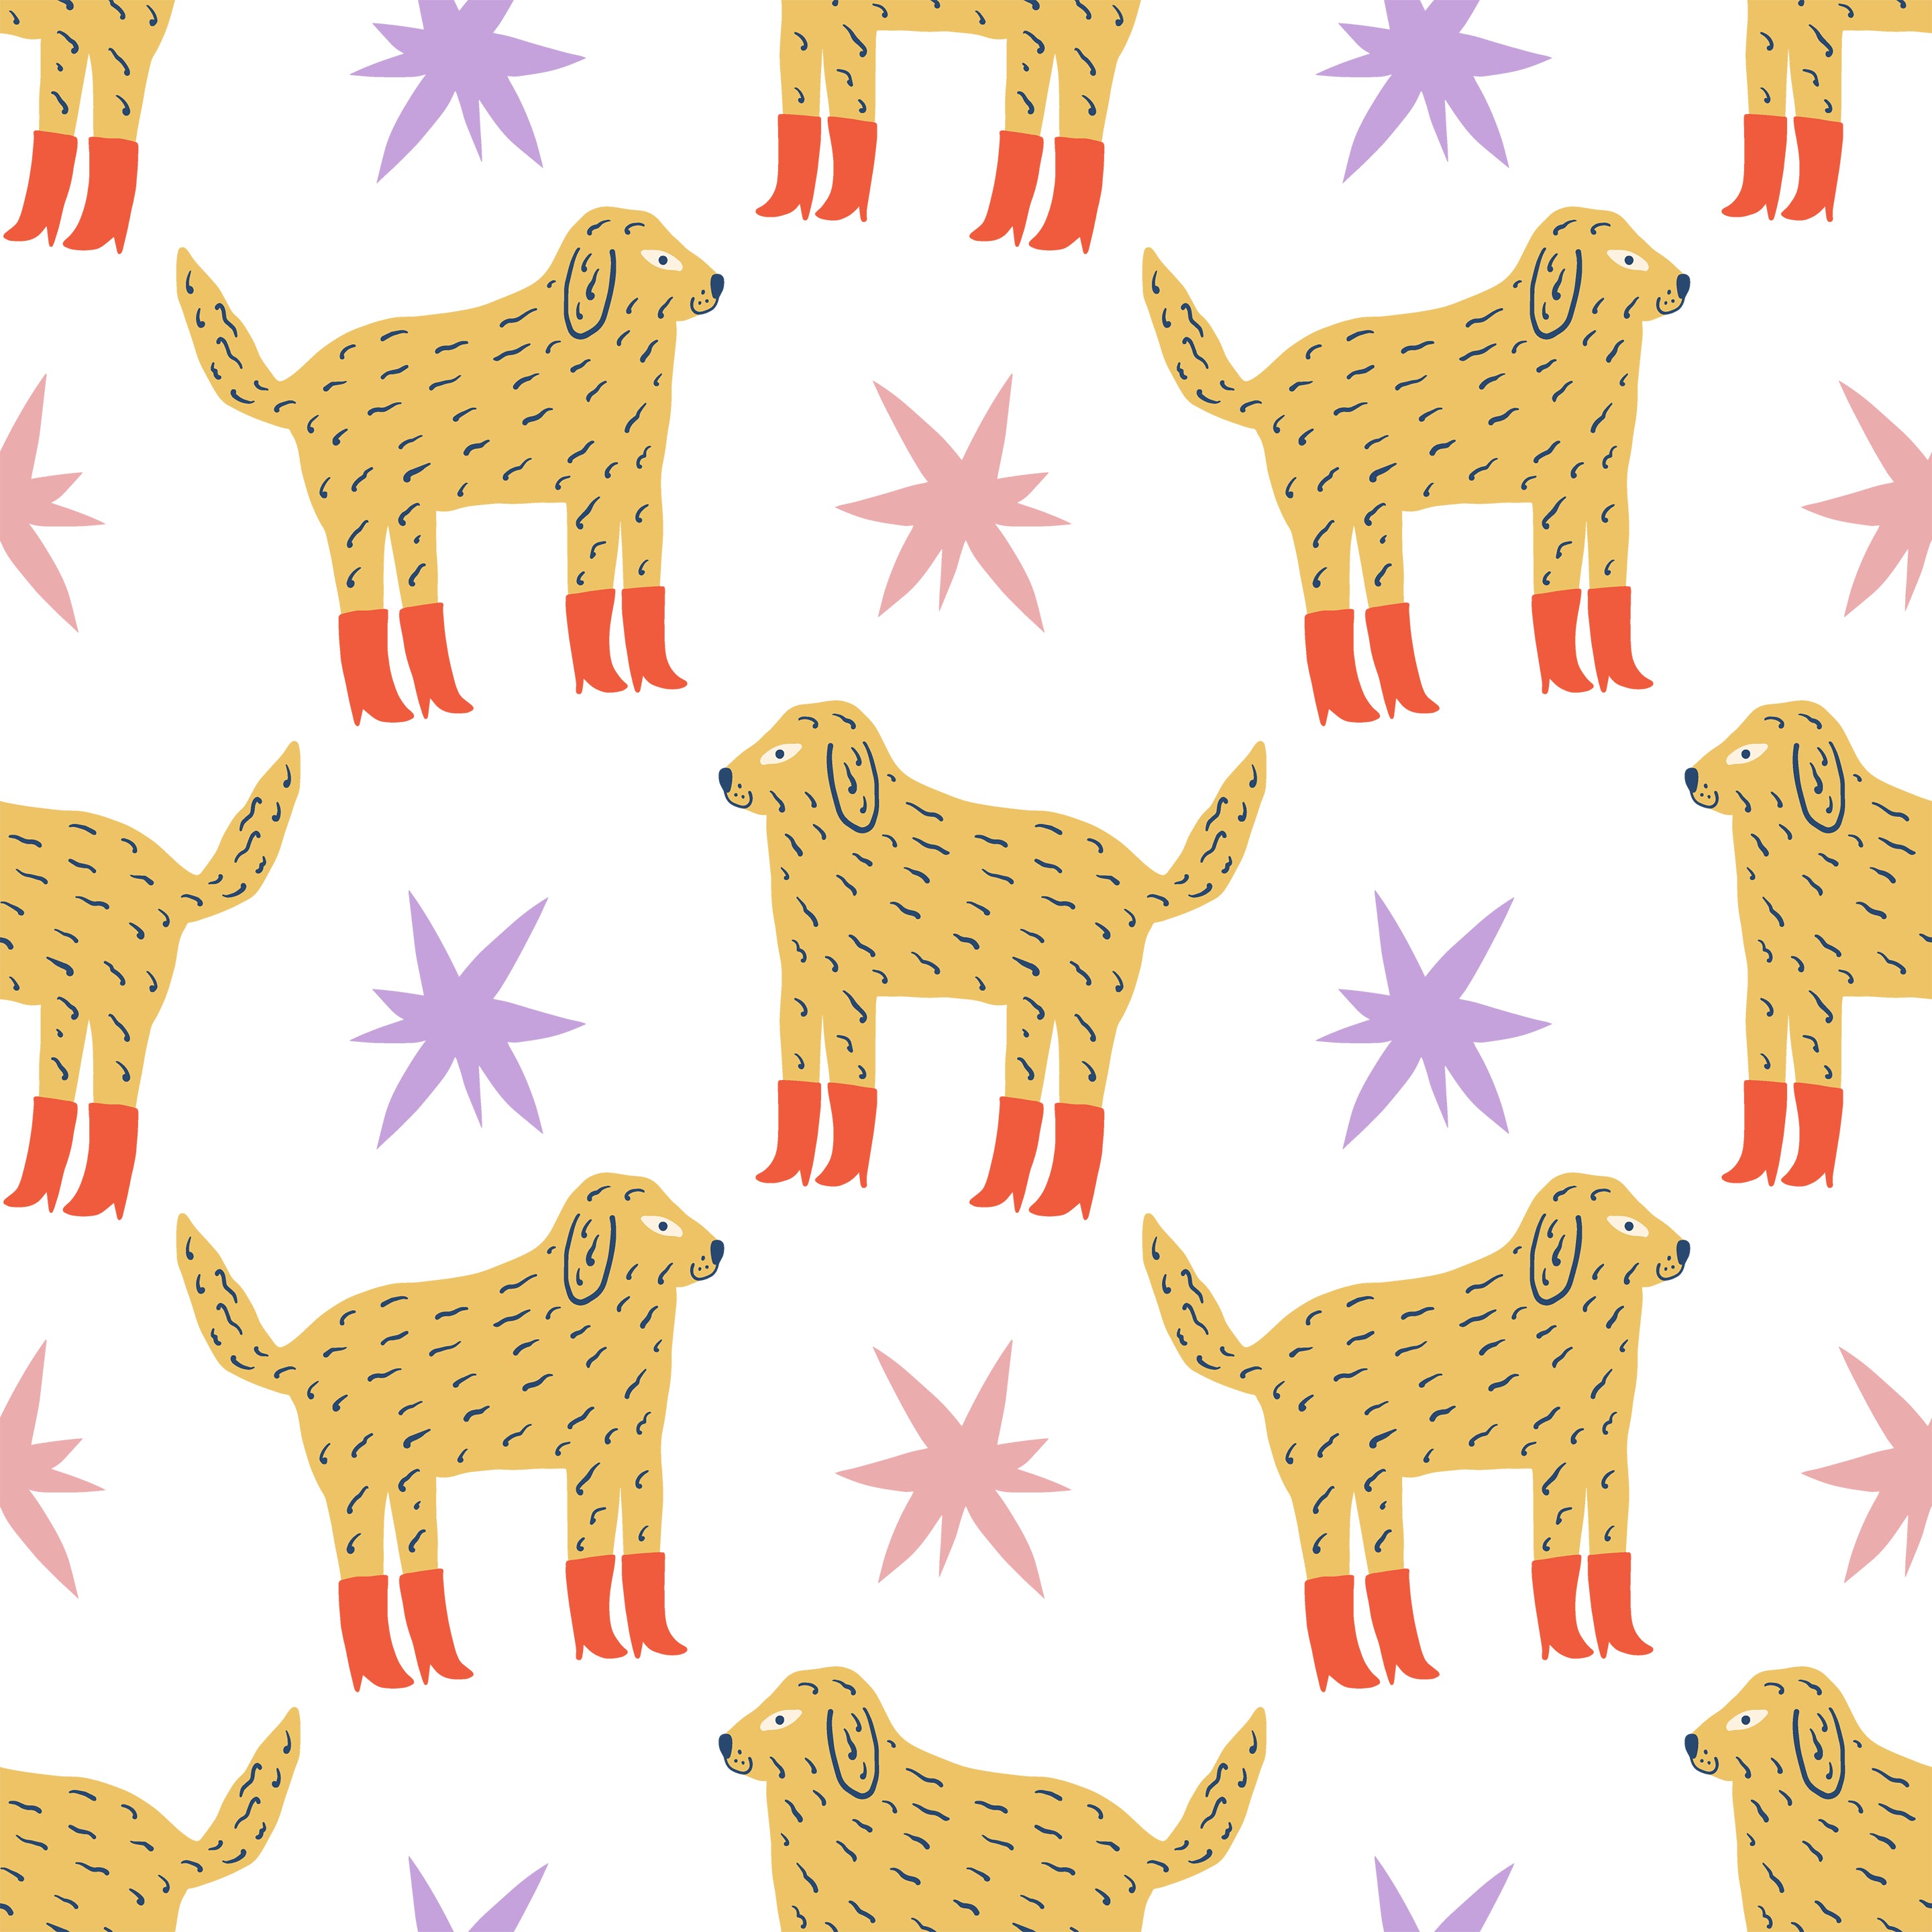 Cheerful and whimsical wallpaper pattern from 'Dog Wallpaper 43' featuring tan dogs with red boots and abstract purple and pink star motifs on a white background. This playful design is ideal for adding a vibrant and fun touch to children's rooms or casual living spaces